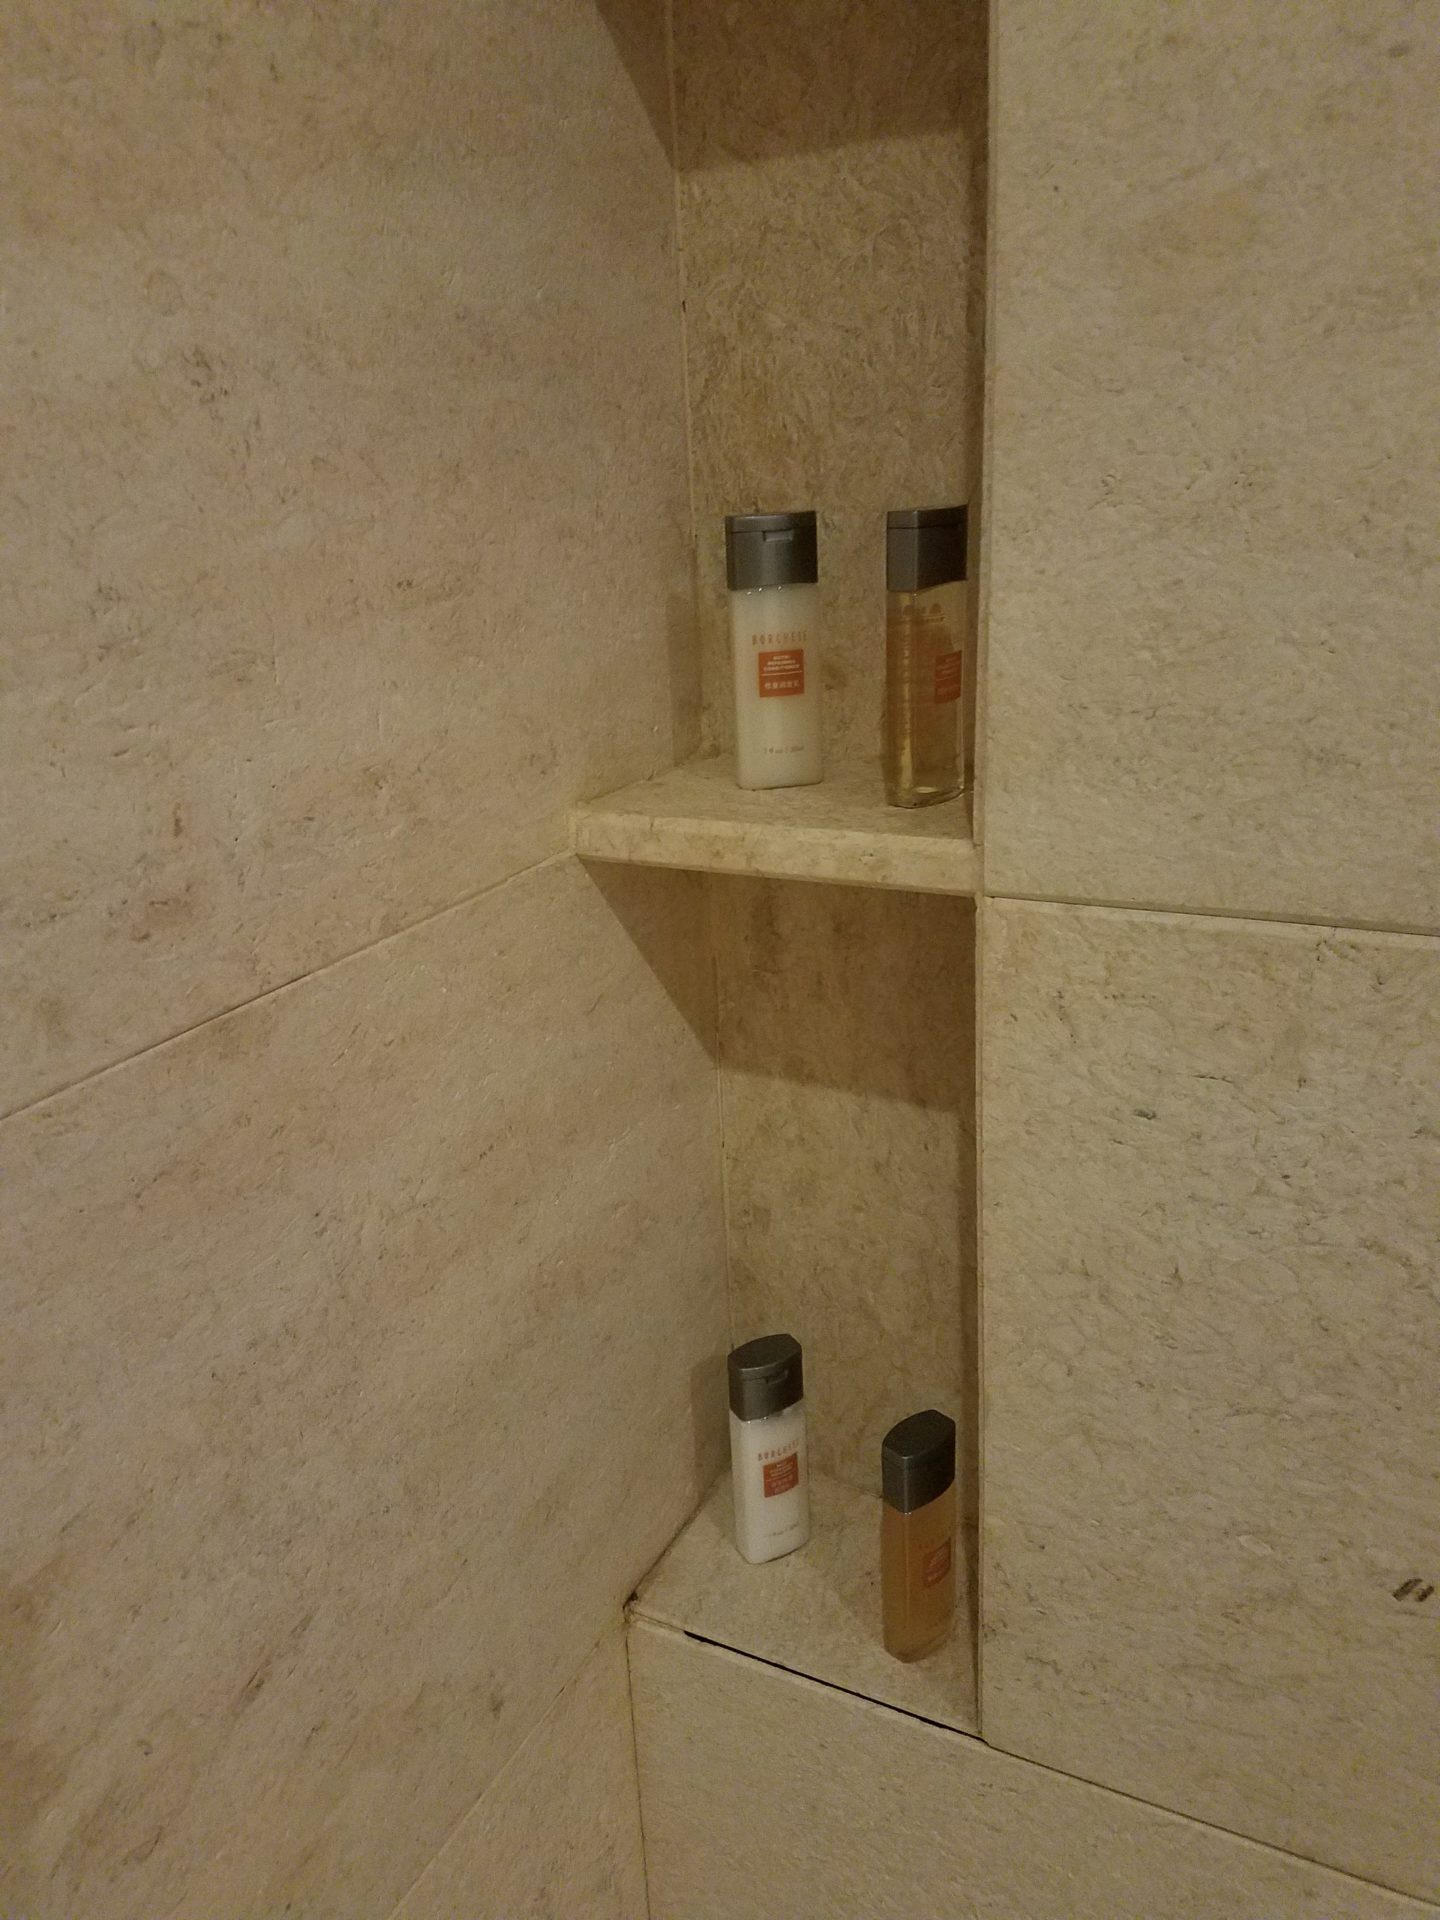 a shelf with small bottles on it